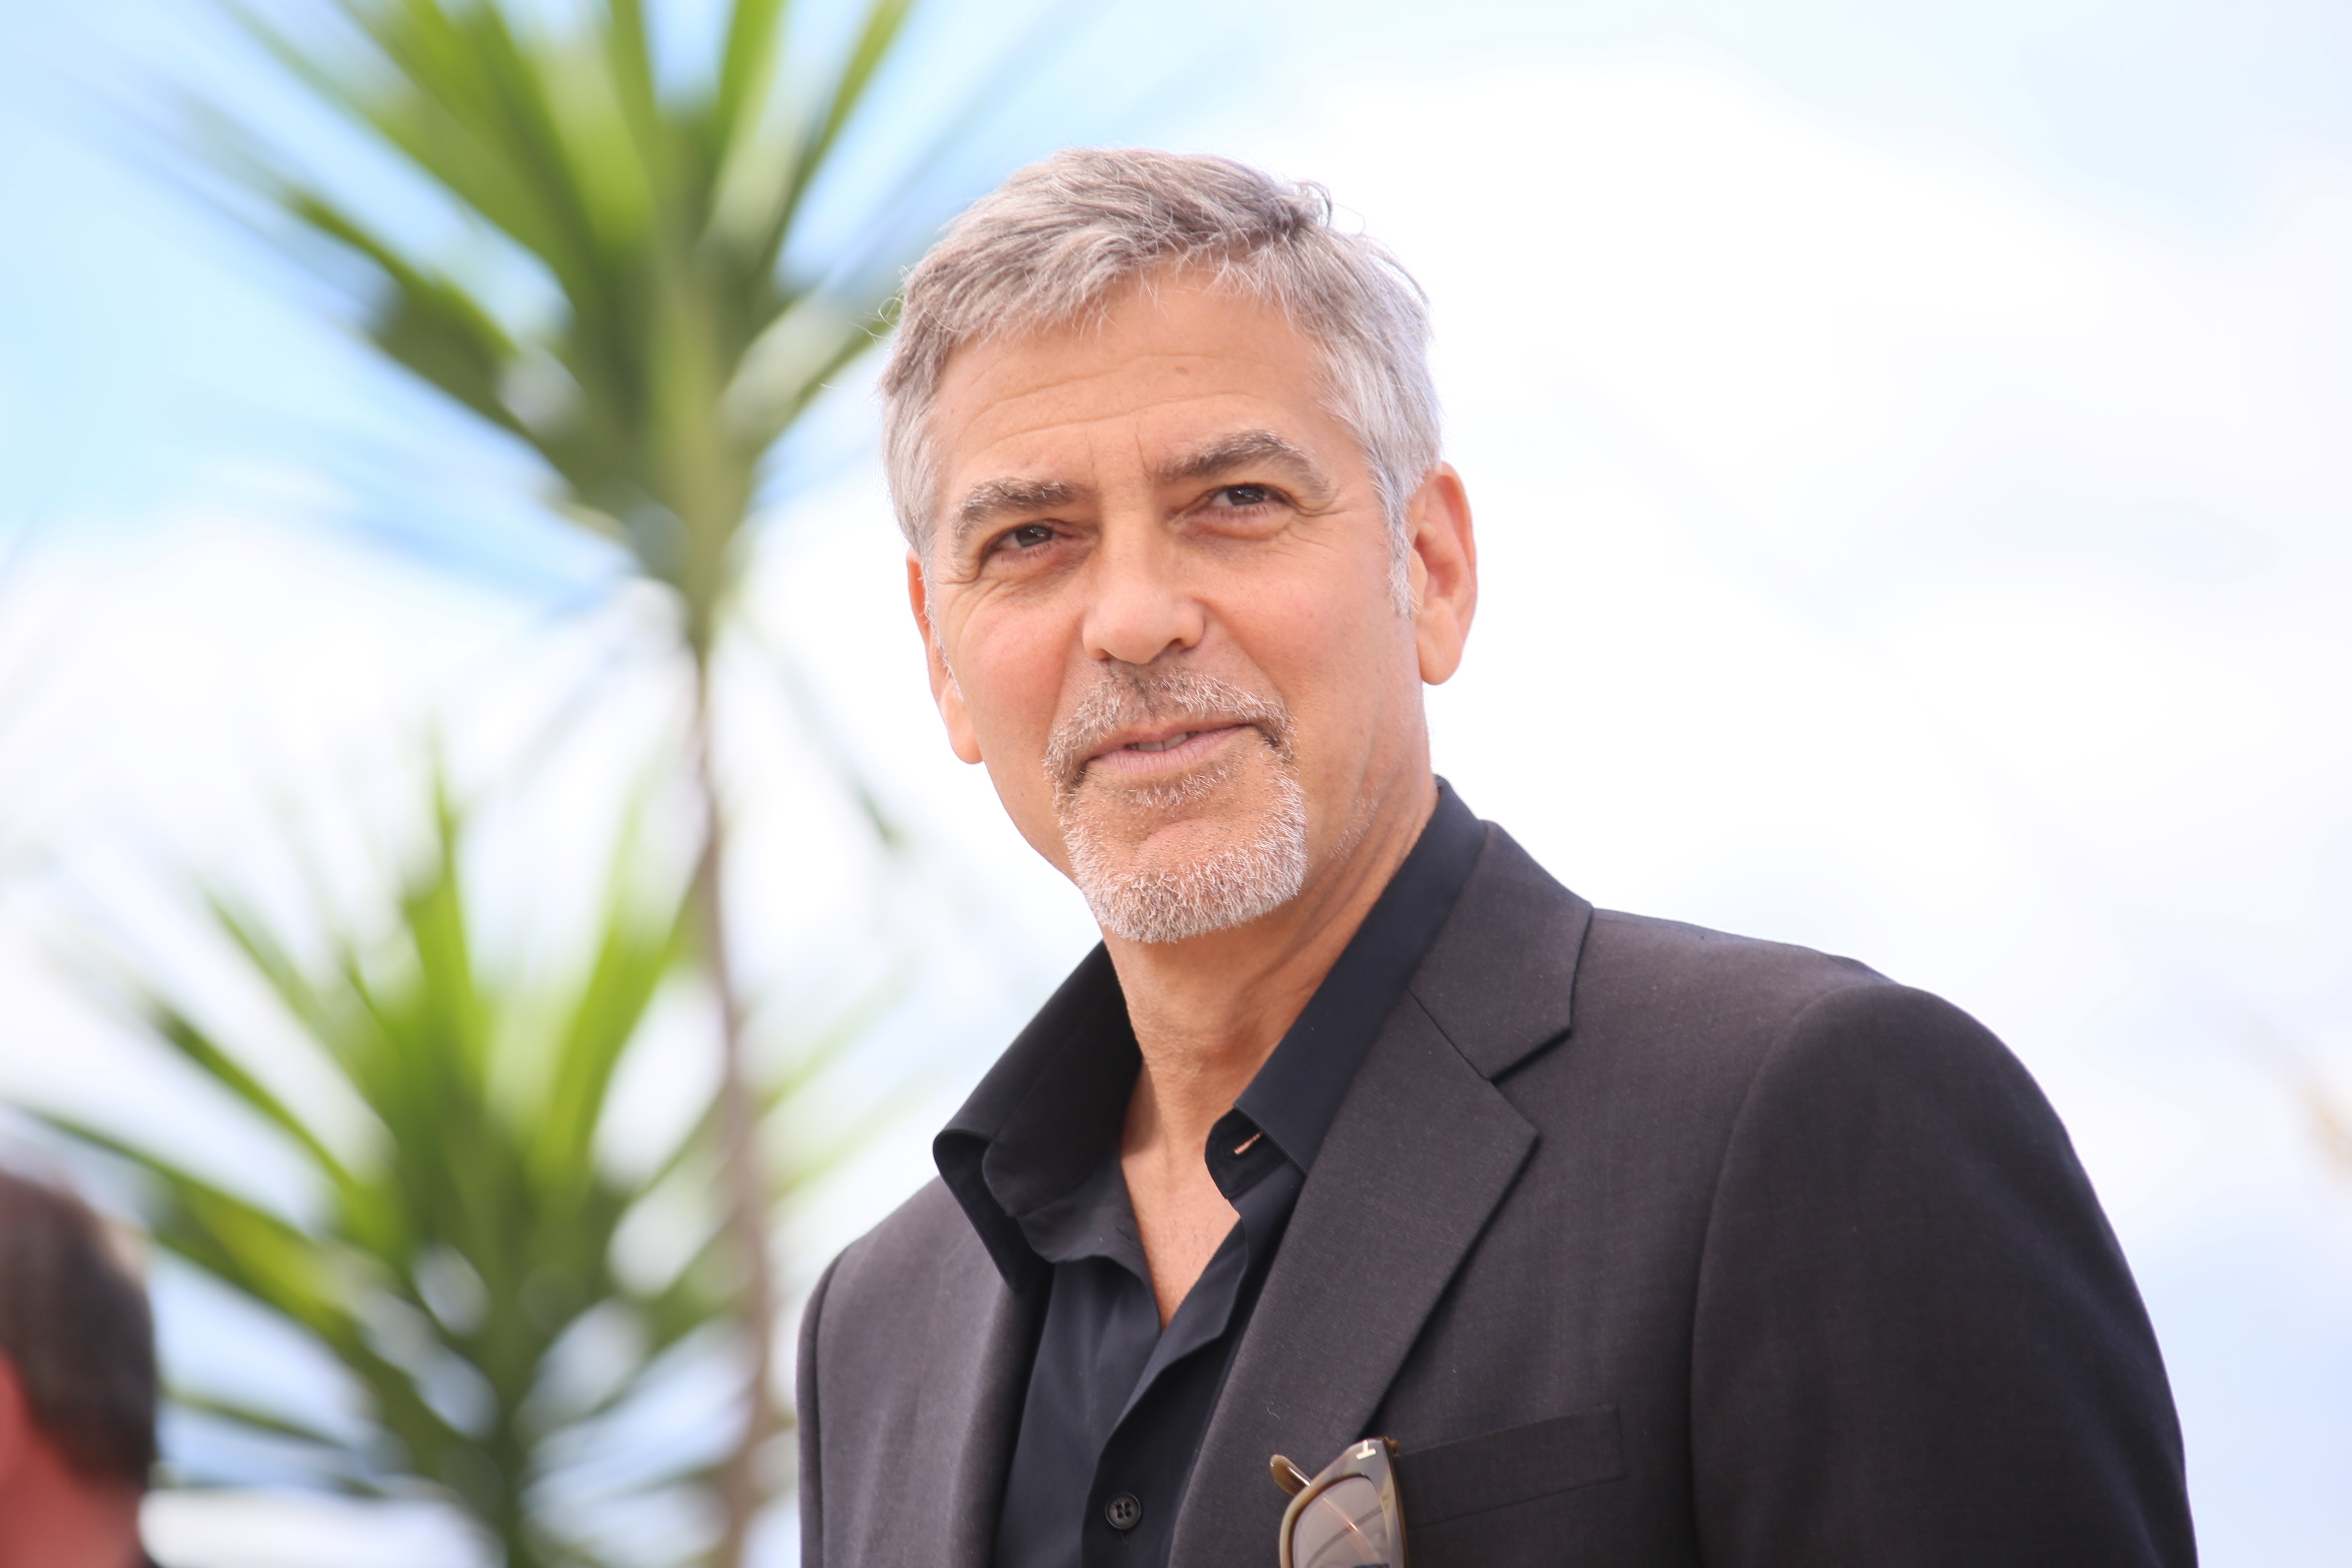 George Clooney attends the 'Money Monster' photocall during the 69th annual Cannes Film Festival at the Palais des Festivals on May 12, 2016 in Cannes, France | Photo: Shutterstock